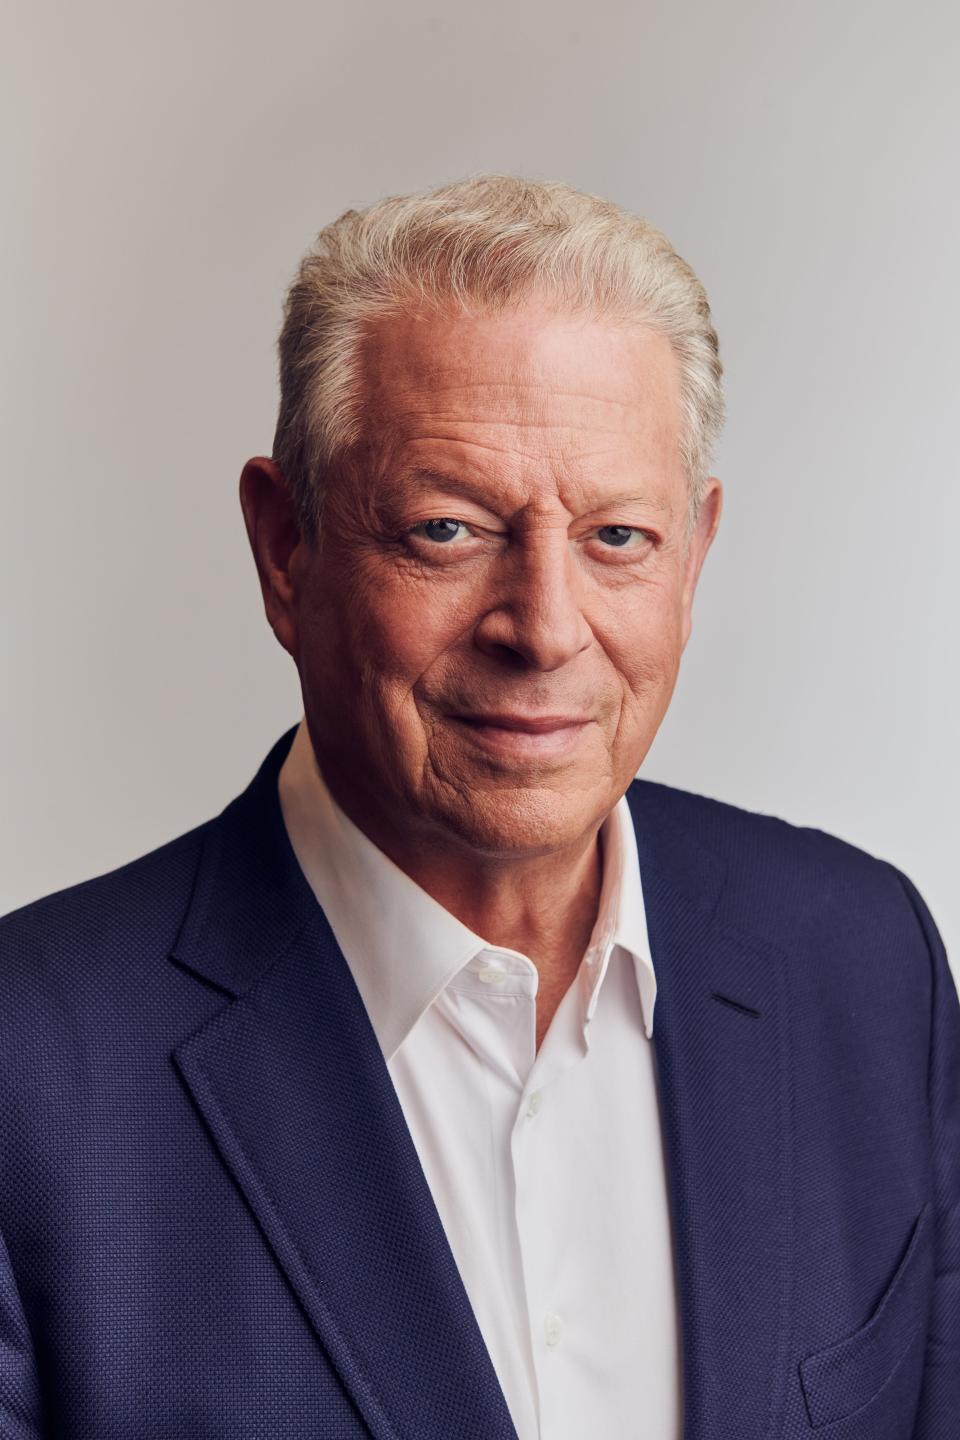 Former Vice President Al Gore, founder and chairman of The Climate Reality Project.